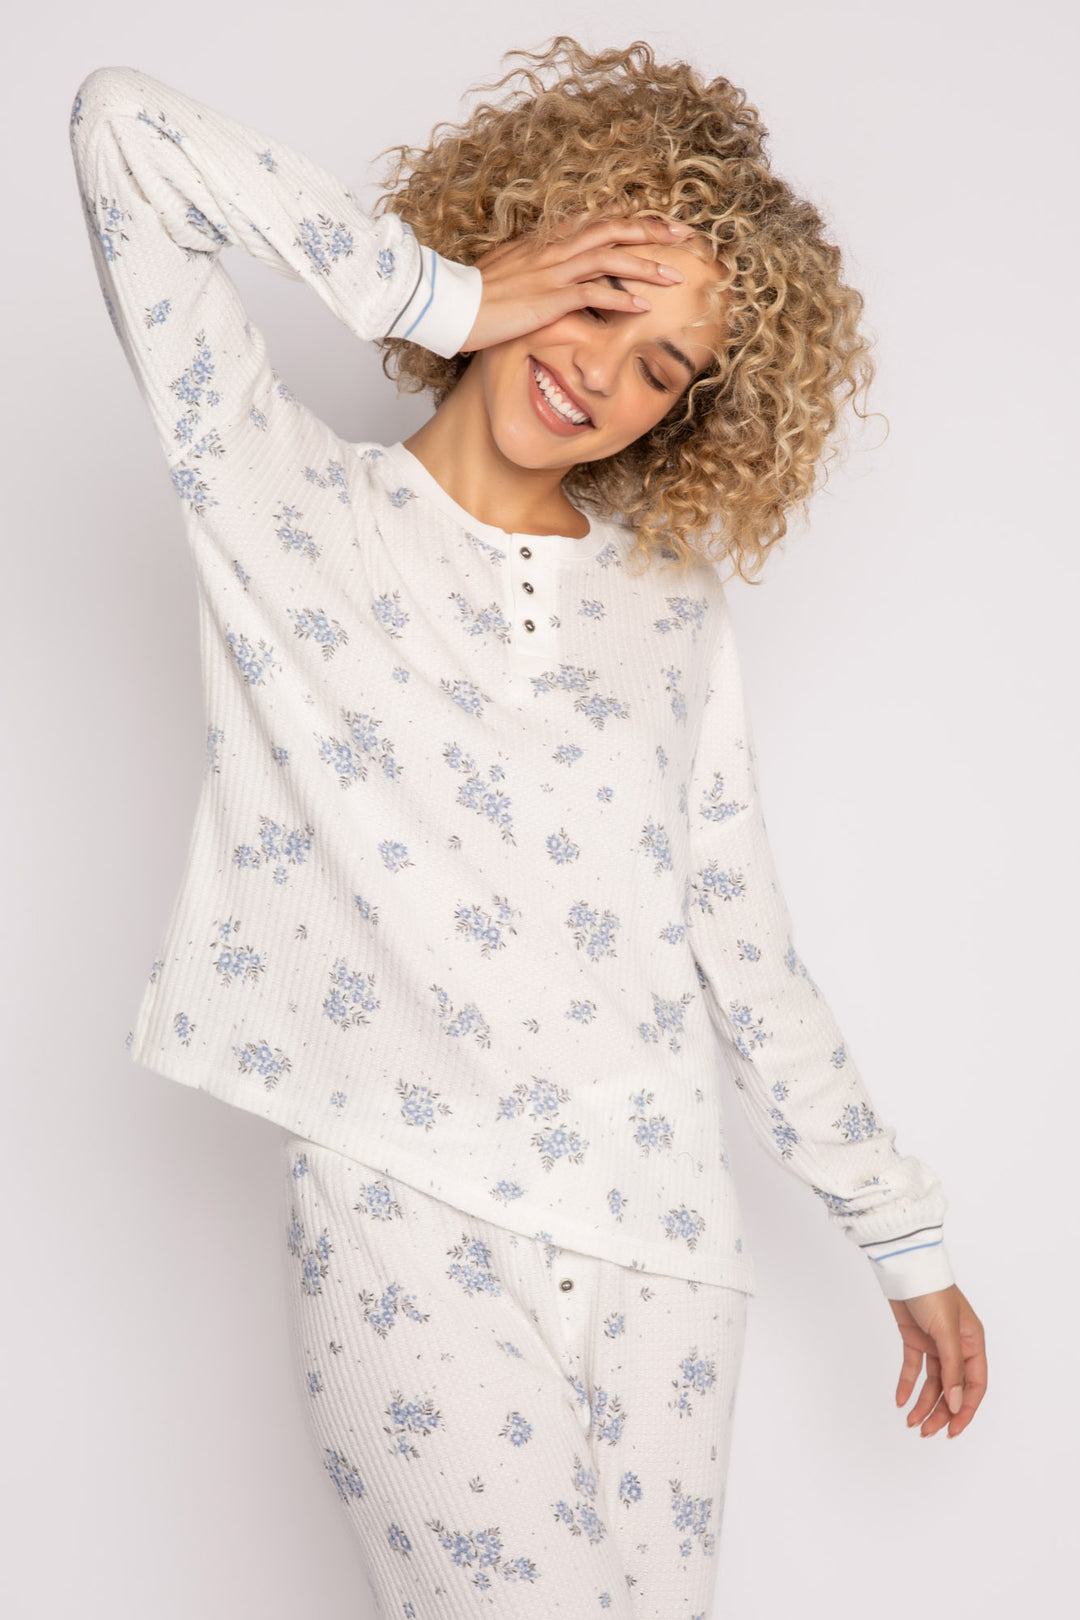 Ivory-blue-grey floral-printed waffle pajama set. 3-button Henley top & jammie pant. Striped cuffs. (7257680740452)